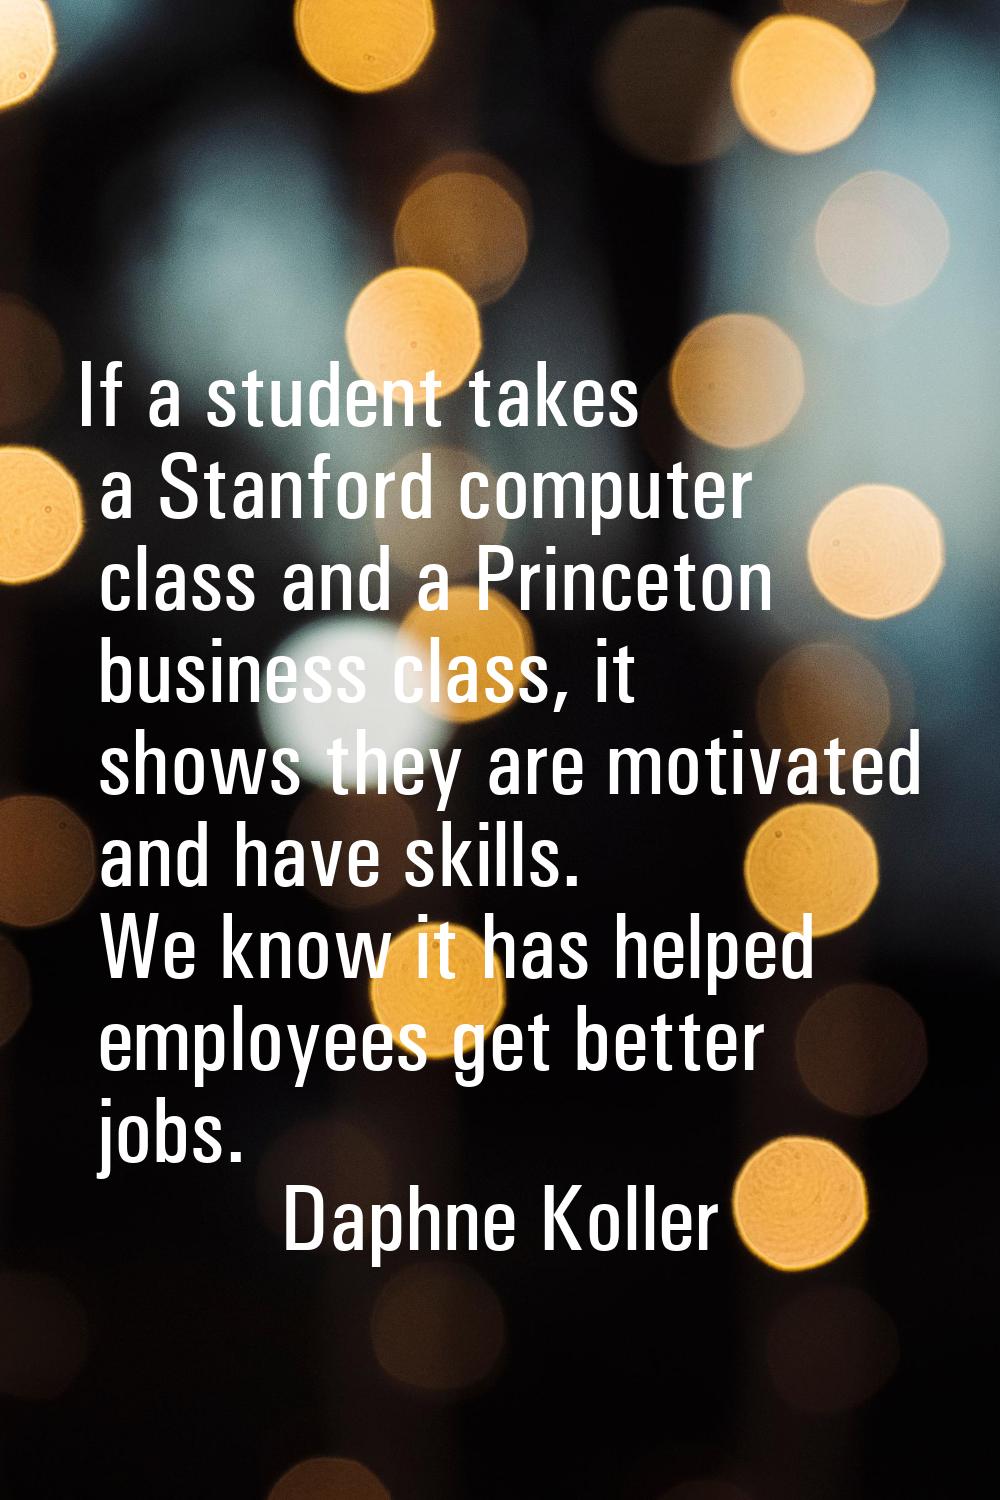 If a student takes a Stanford computer class and a Princeton business class, it shows they are moti